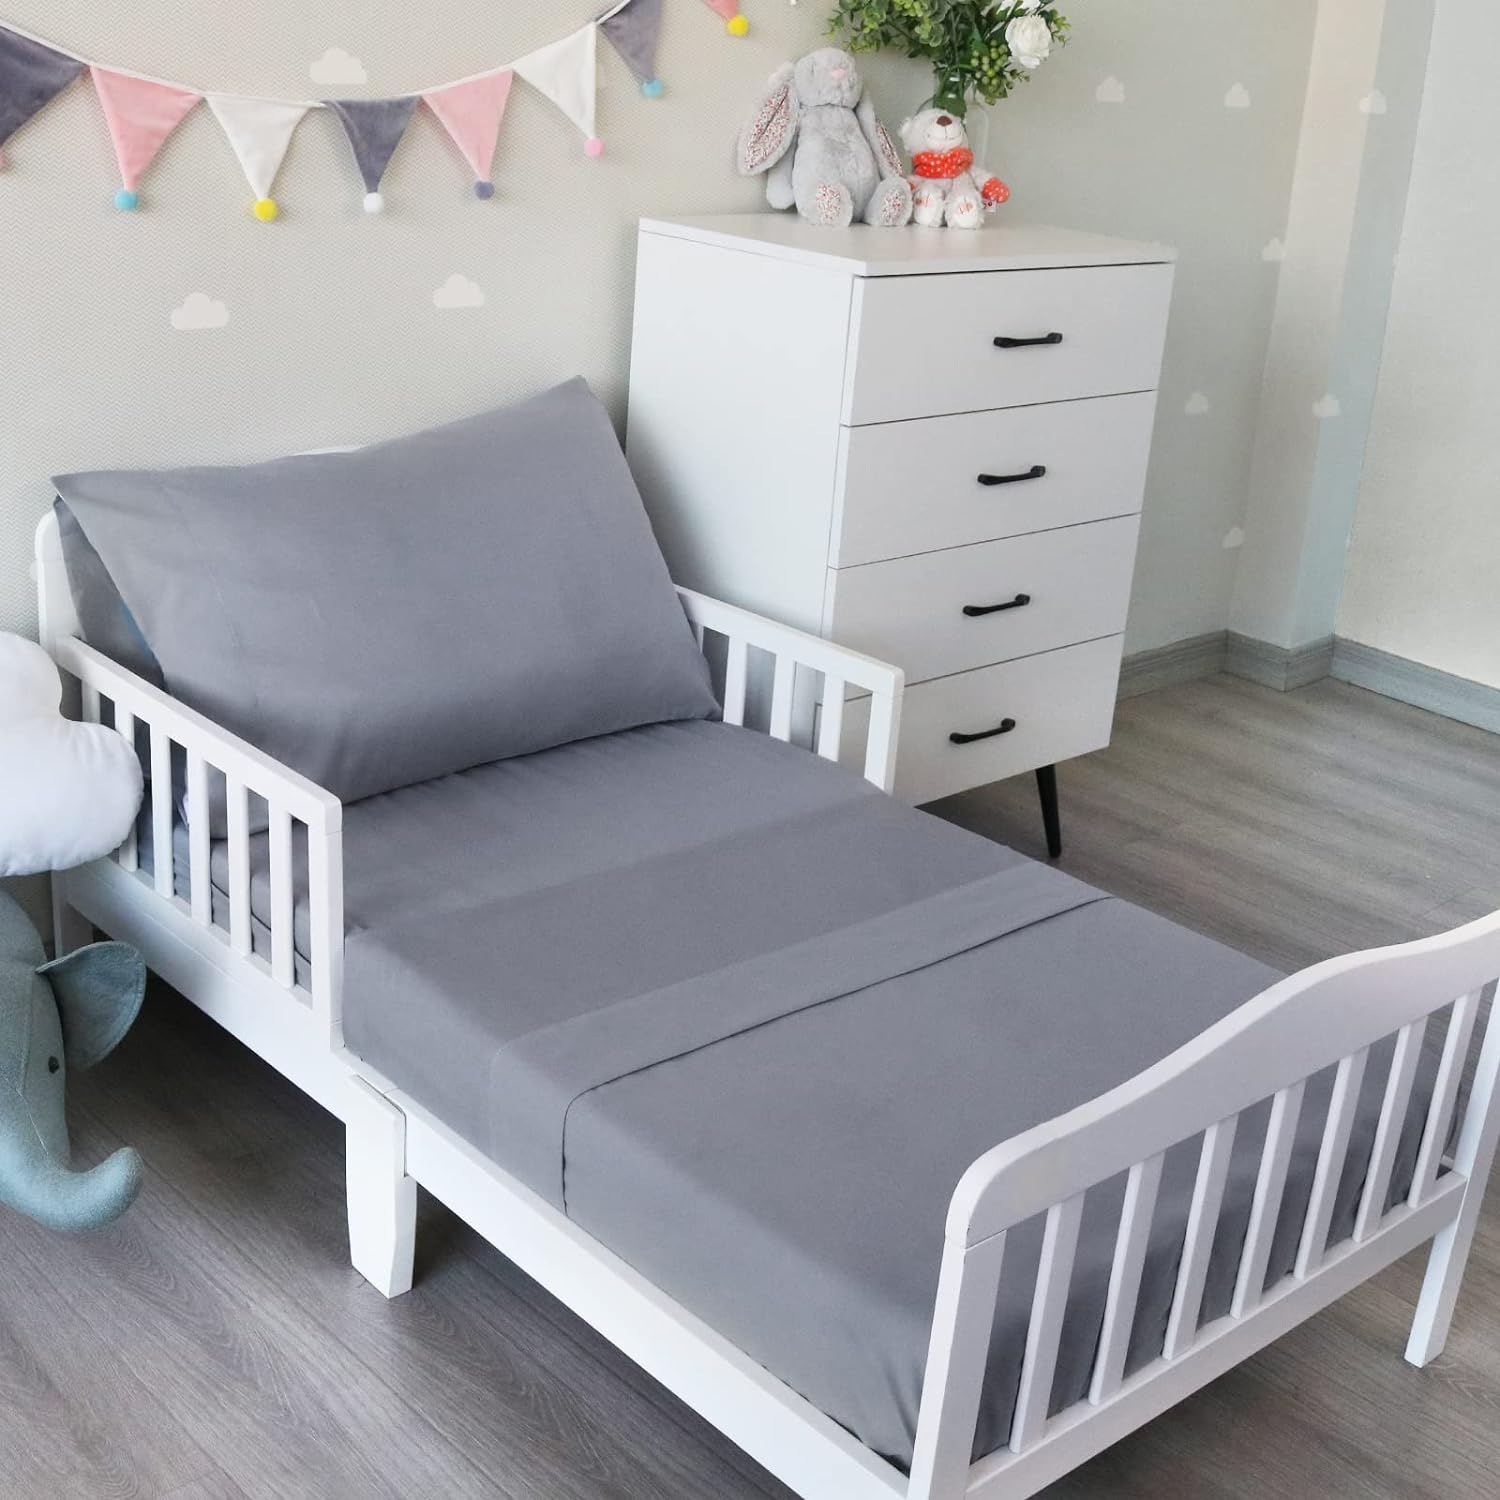 Toddler Bedding Set - 3 Pieces, Includes a Crib Fitted Sheet, Flat Sheet and Envelope Pillowcase, Soft and Breathable, Grey - Biloban Online Store